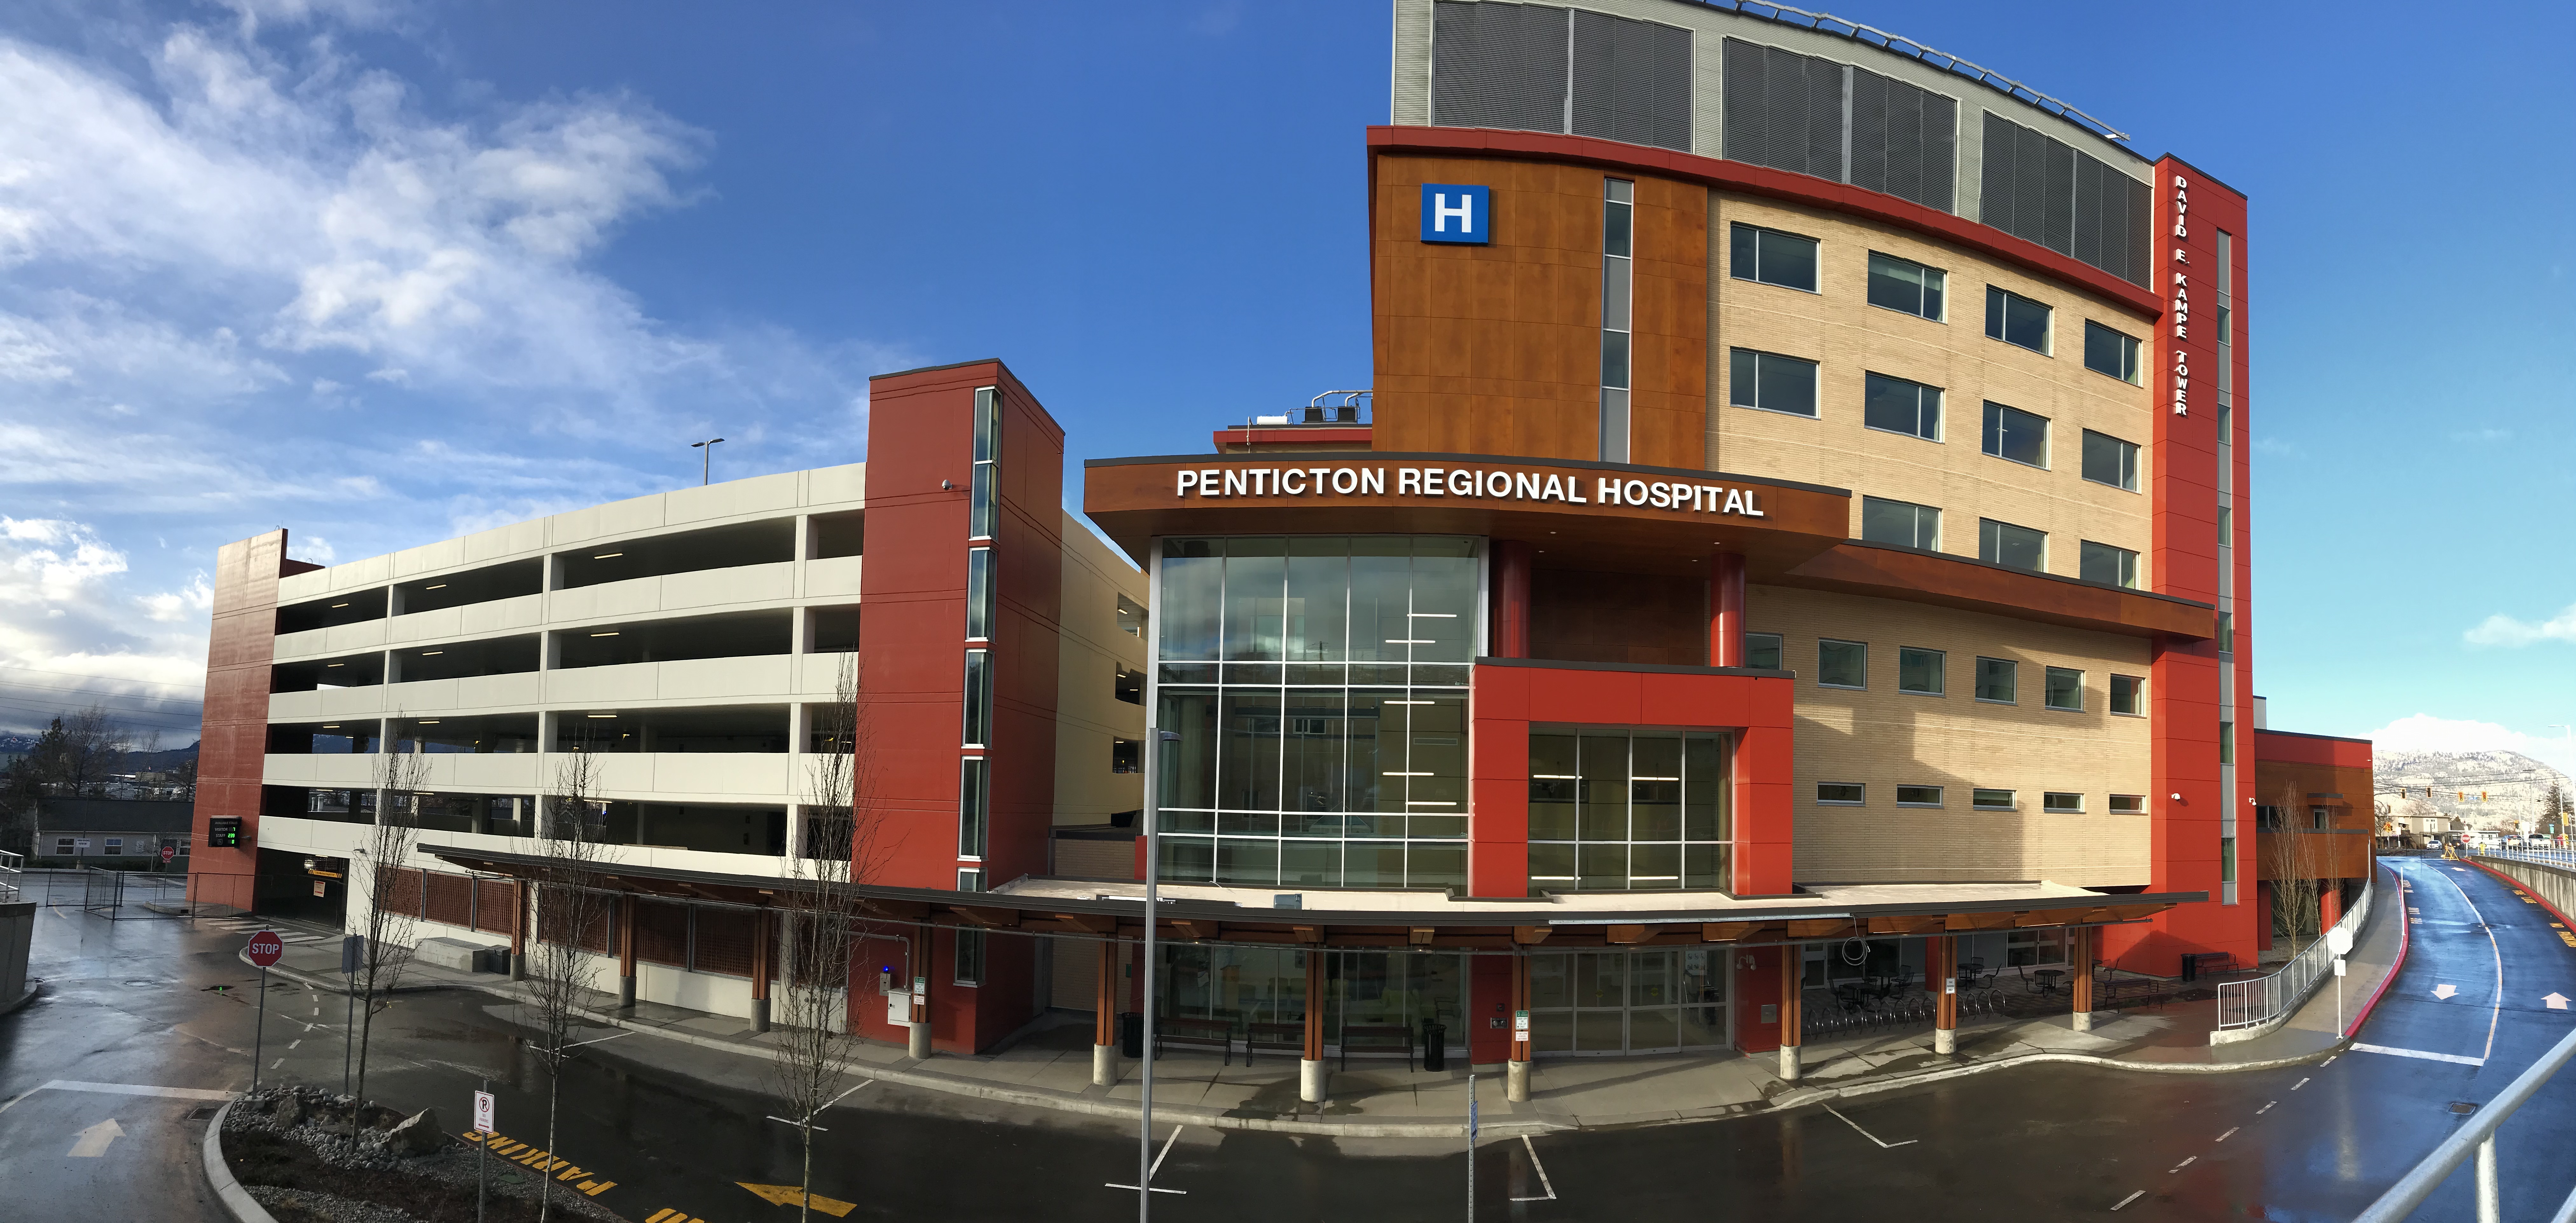 The David E. Kampe Tower at Penticton Regional Hospital opened in 2019.